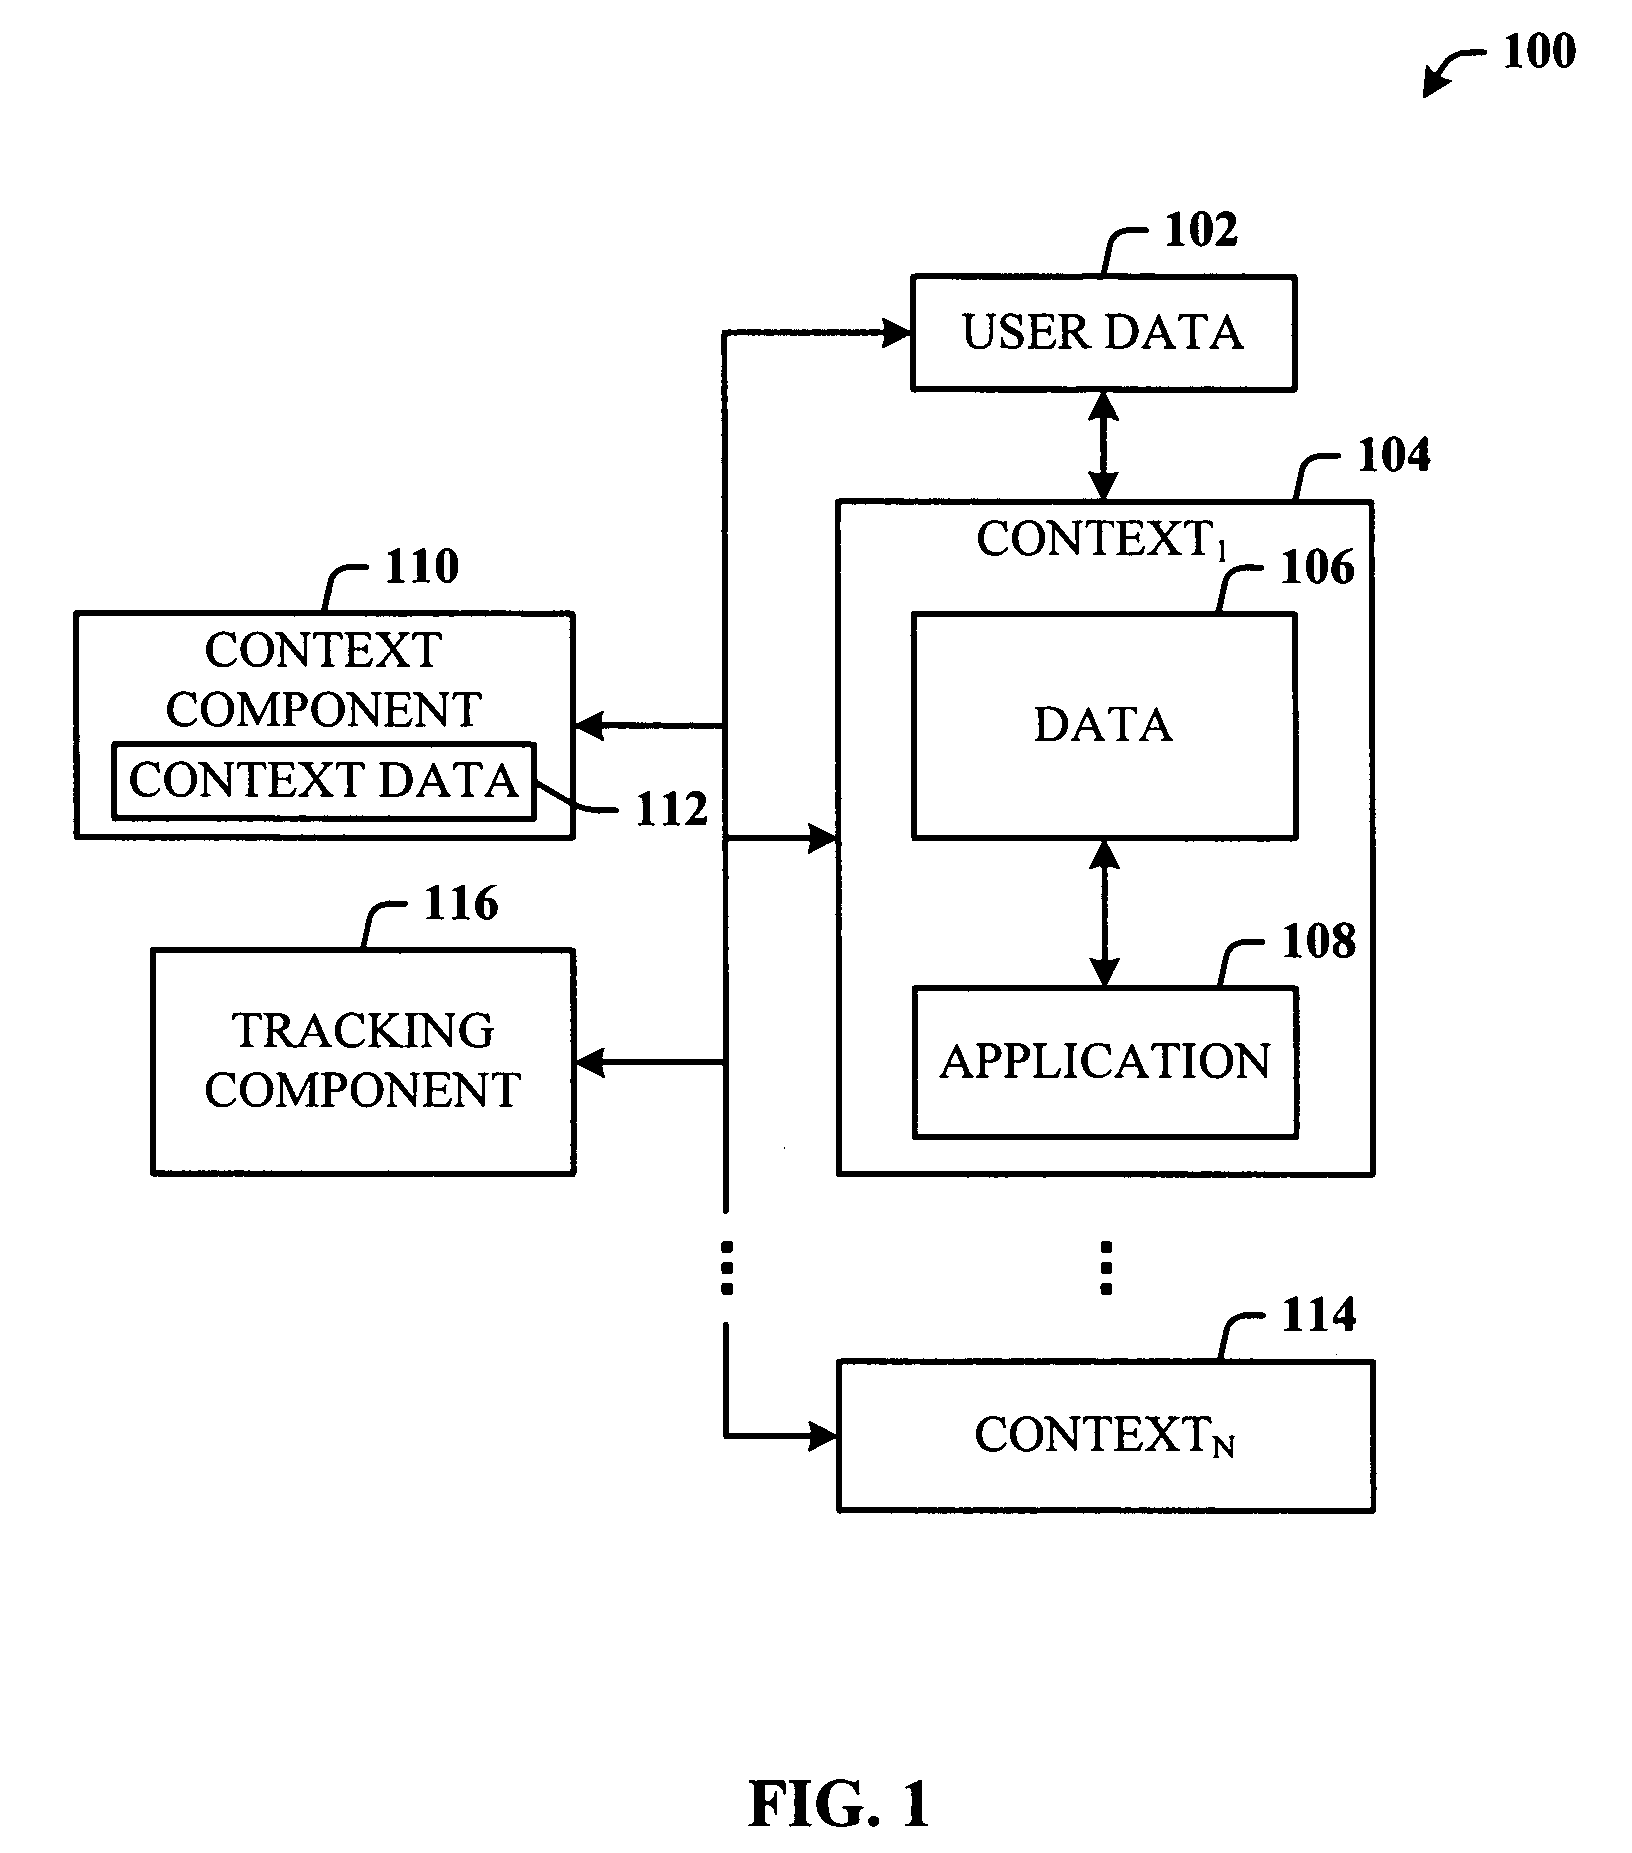 Dynamic association of electronically stored information with iterative workflow changes